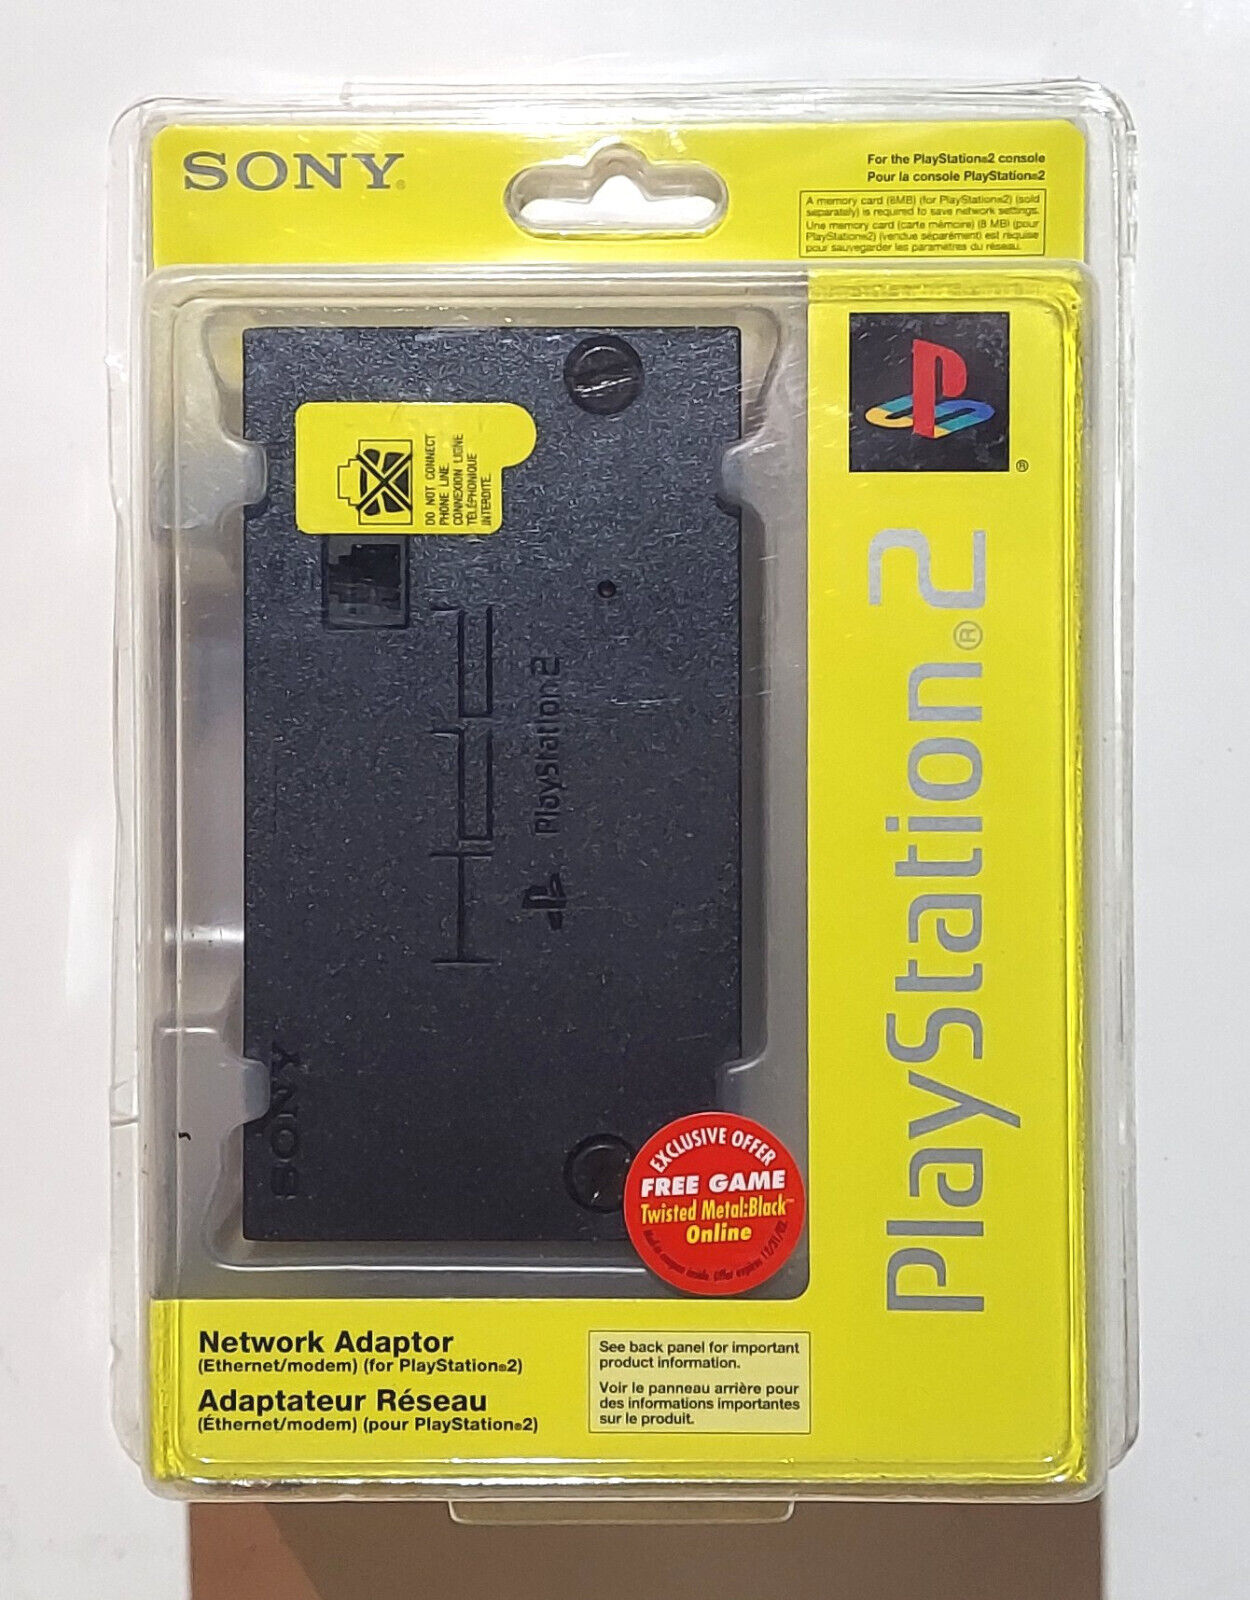 Sony Playstation 2 (PS2) Network Adapter SCPH-10281. Brand New. Factory Sealed.